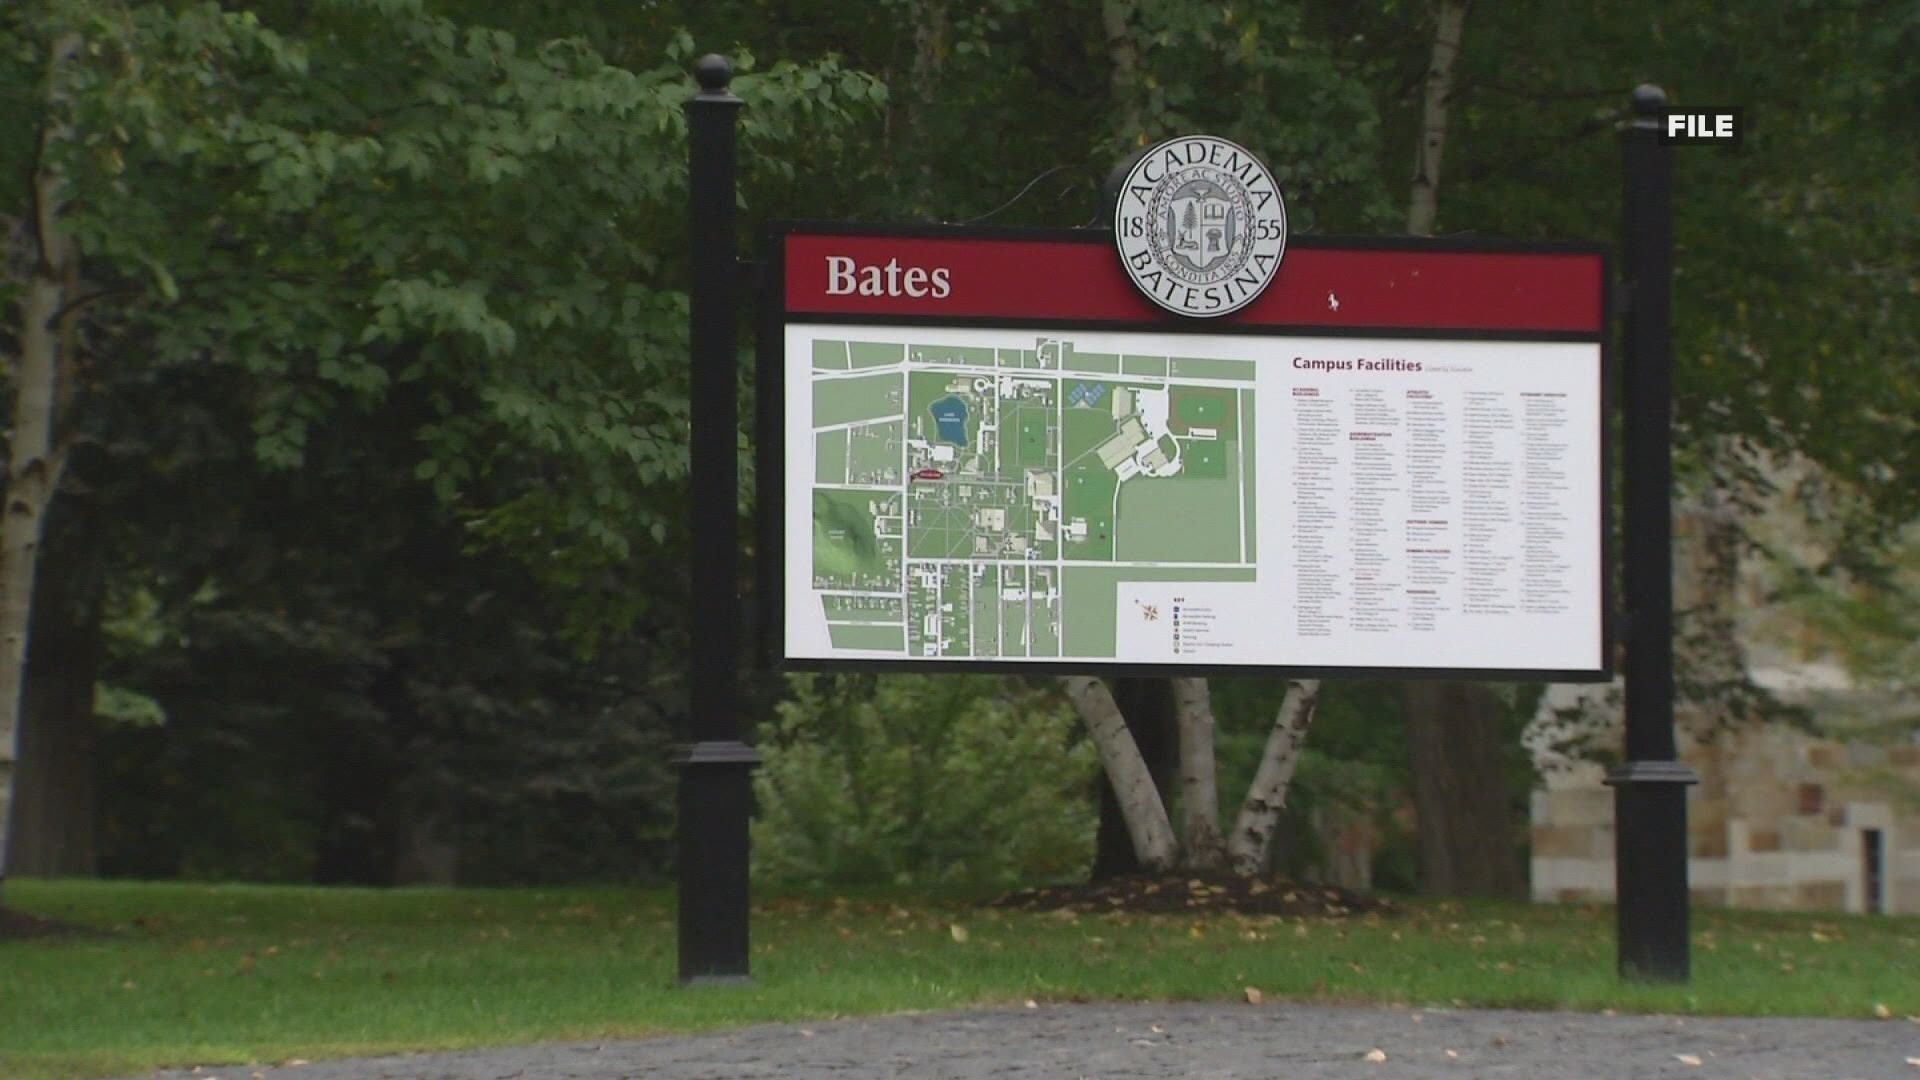 Bates College says the campus will open to students in the Fall.